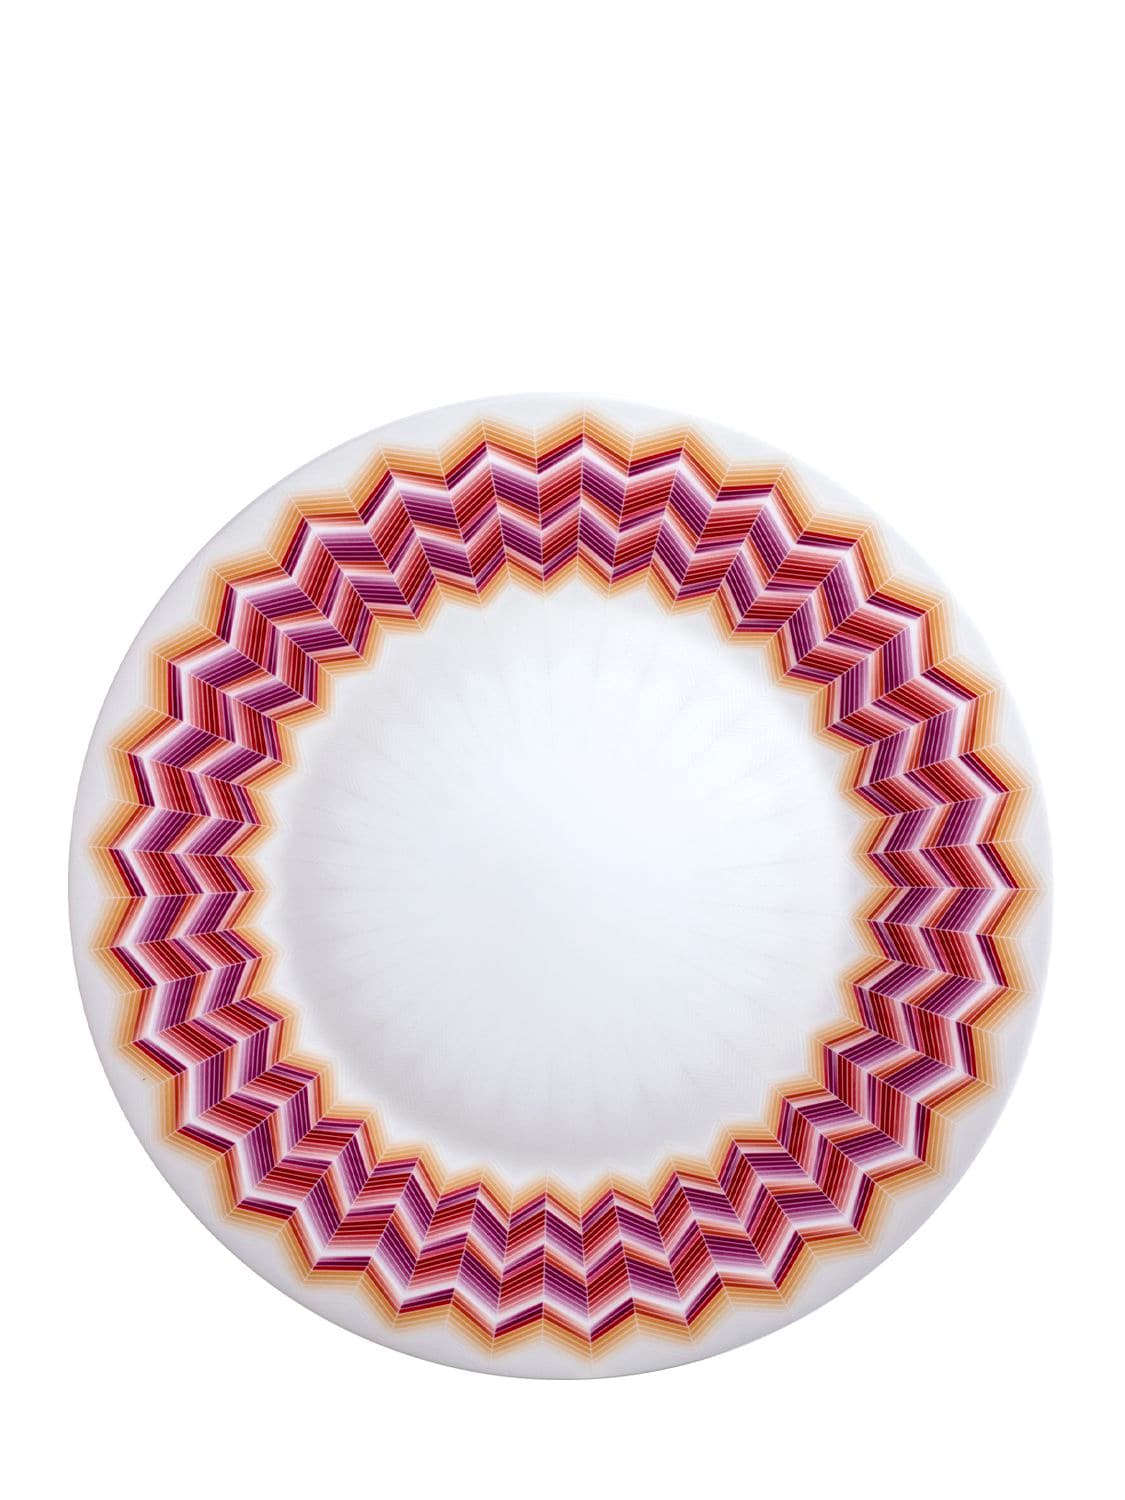 Image of Zig Zag Jarris Charger Plate